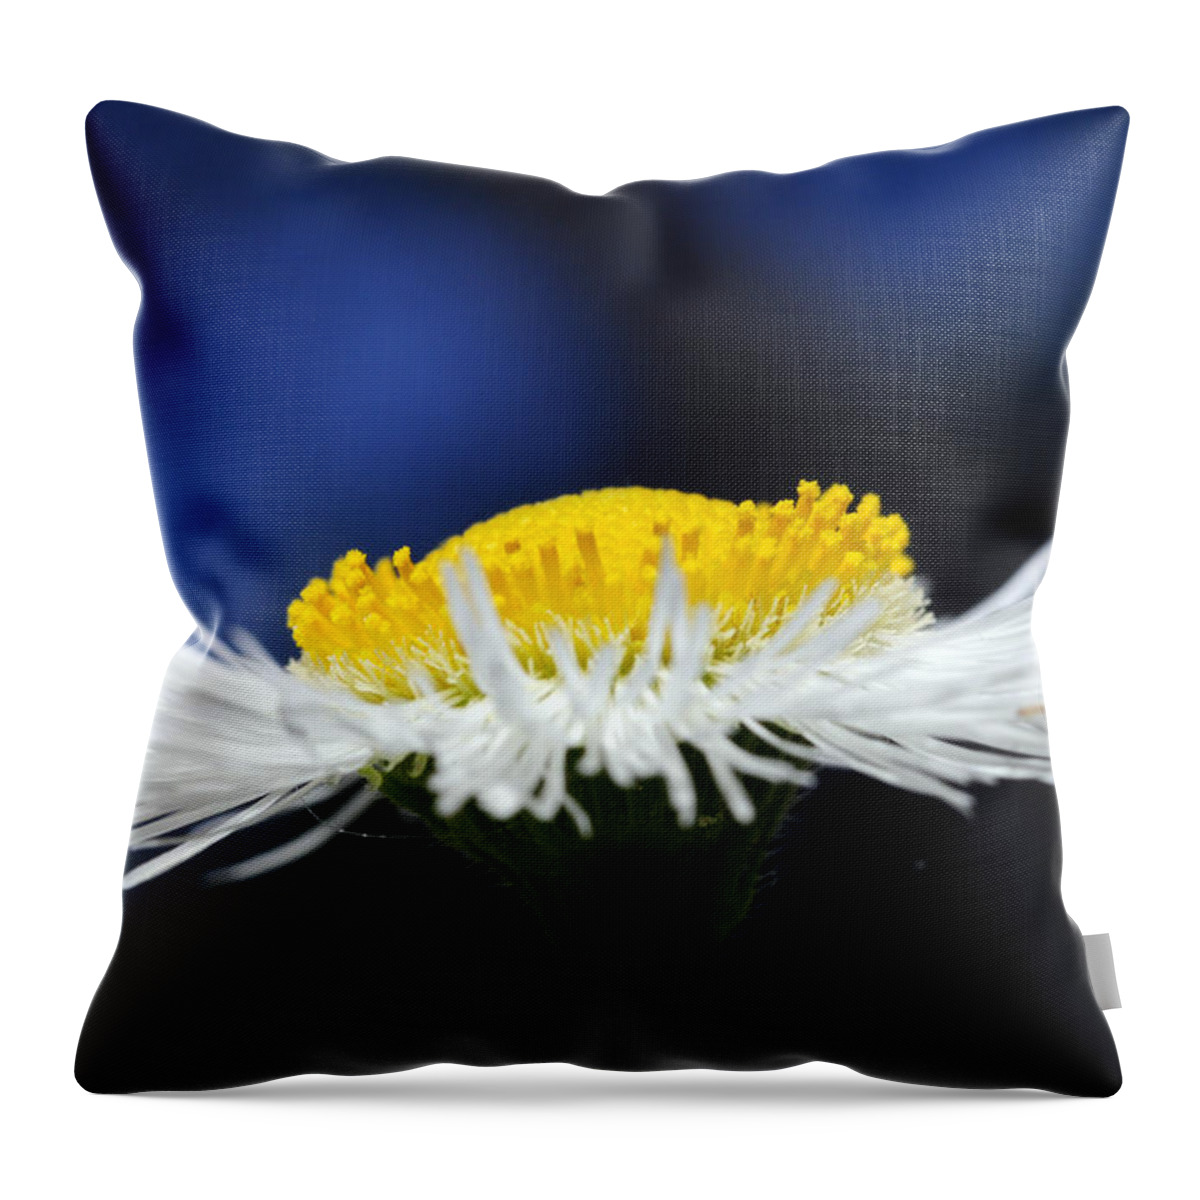 Weed Throw Pillow featuring the photograph Flying Saucer by Wanda Brandon